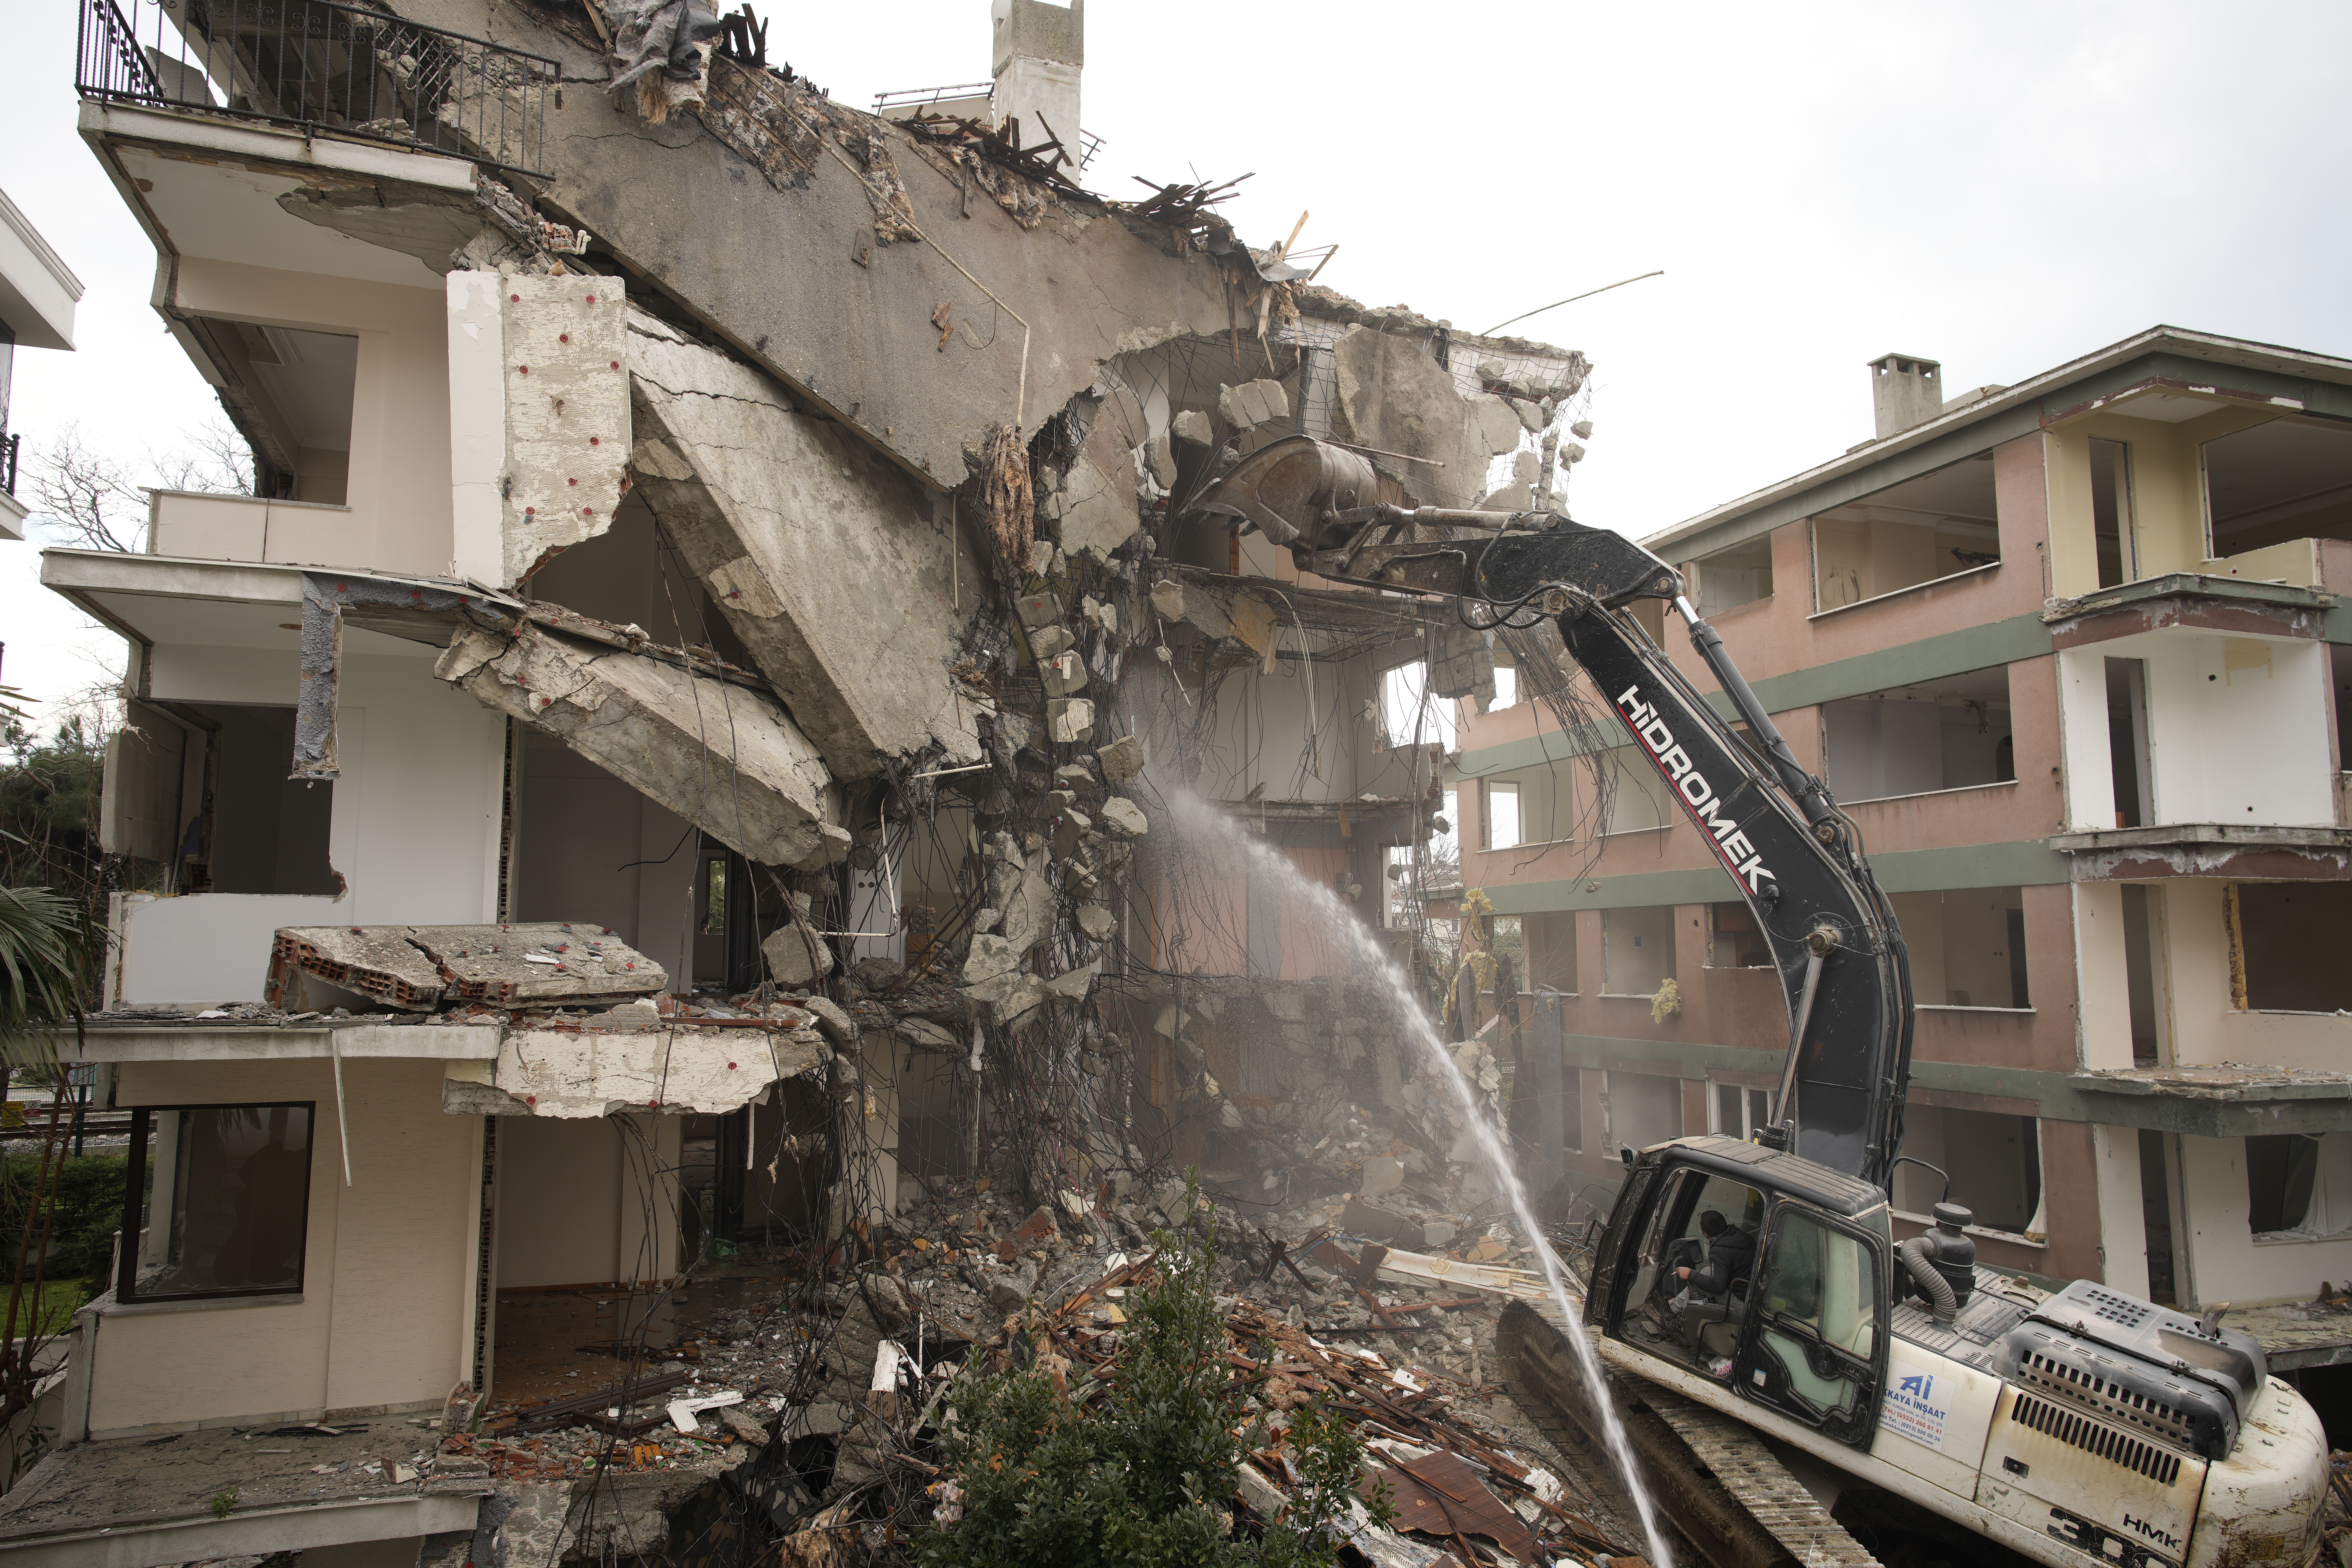 Disaster looms: Istanbul municipality attributes earthquake preparedness gaps to lack of cooperation with gov't